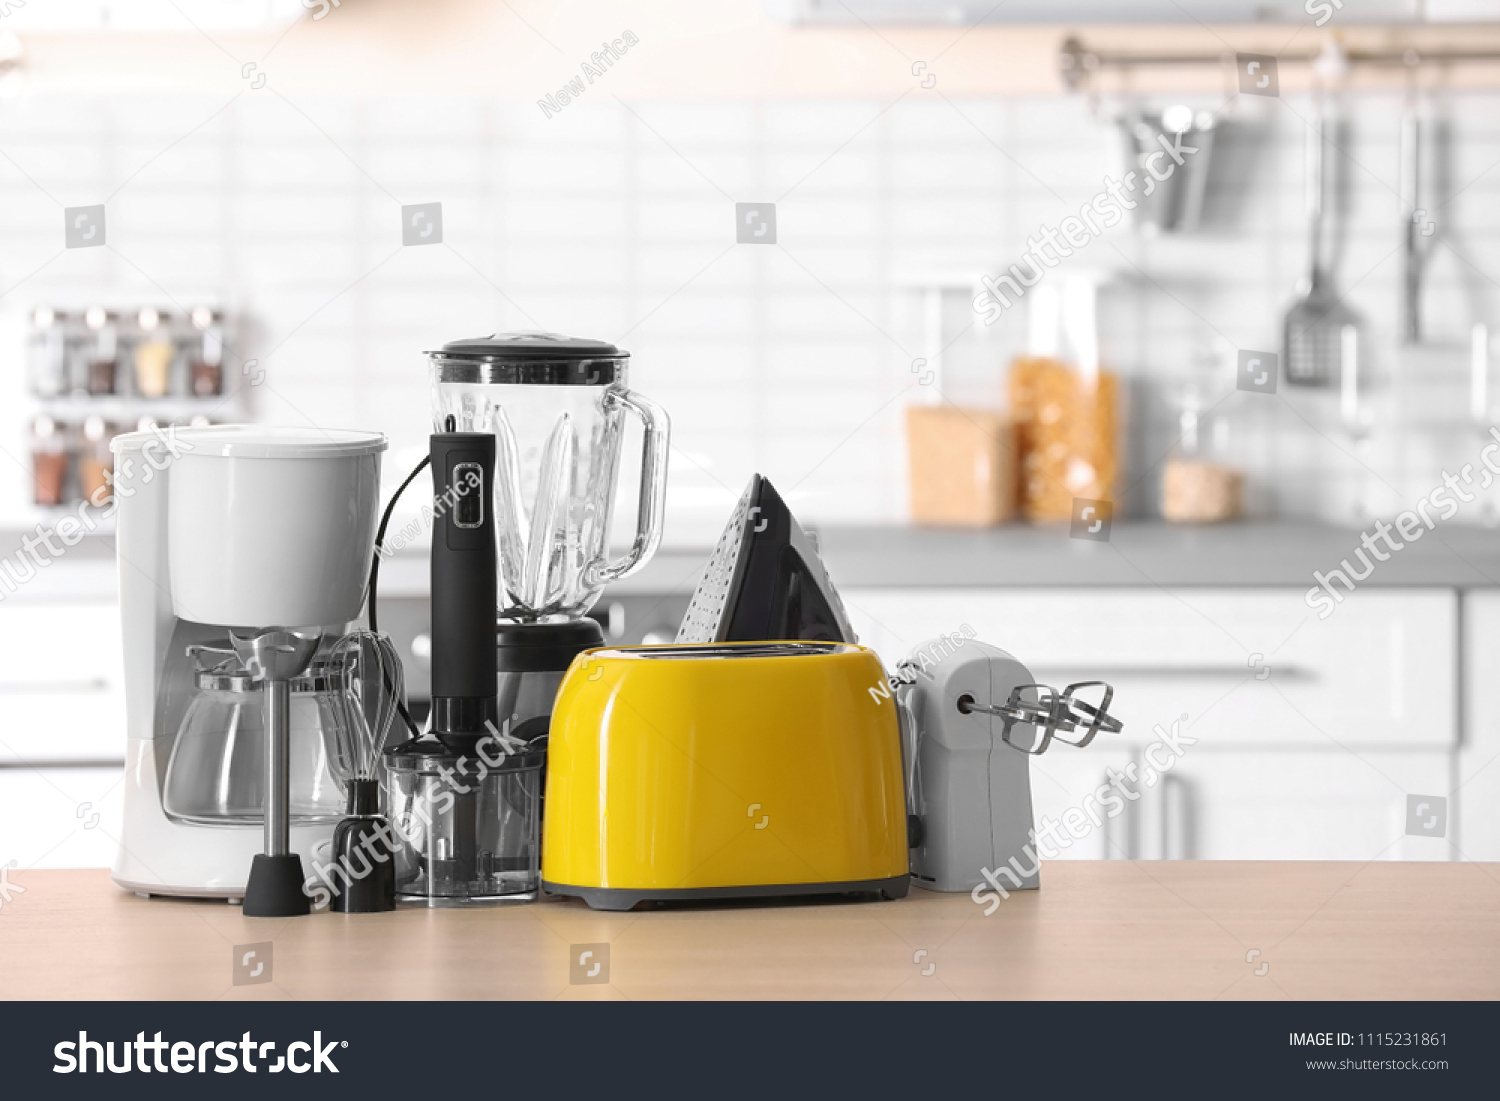 Household and kitchen appliances on table against blurred background #1115231861